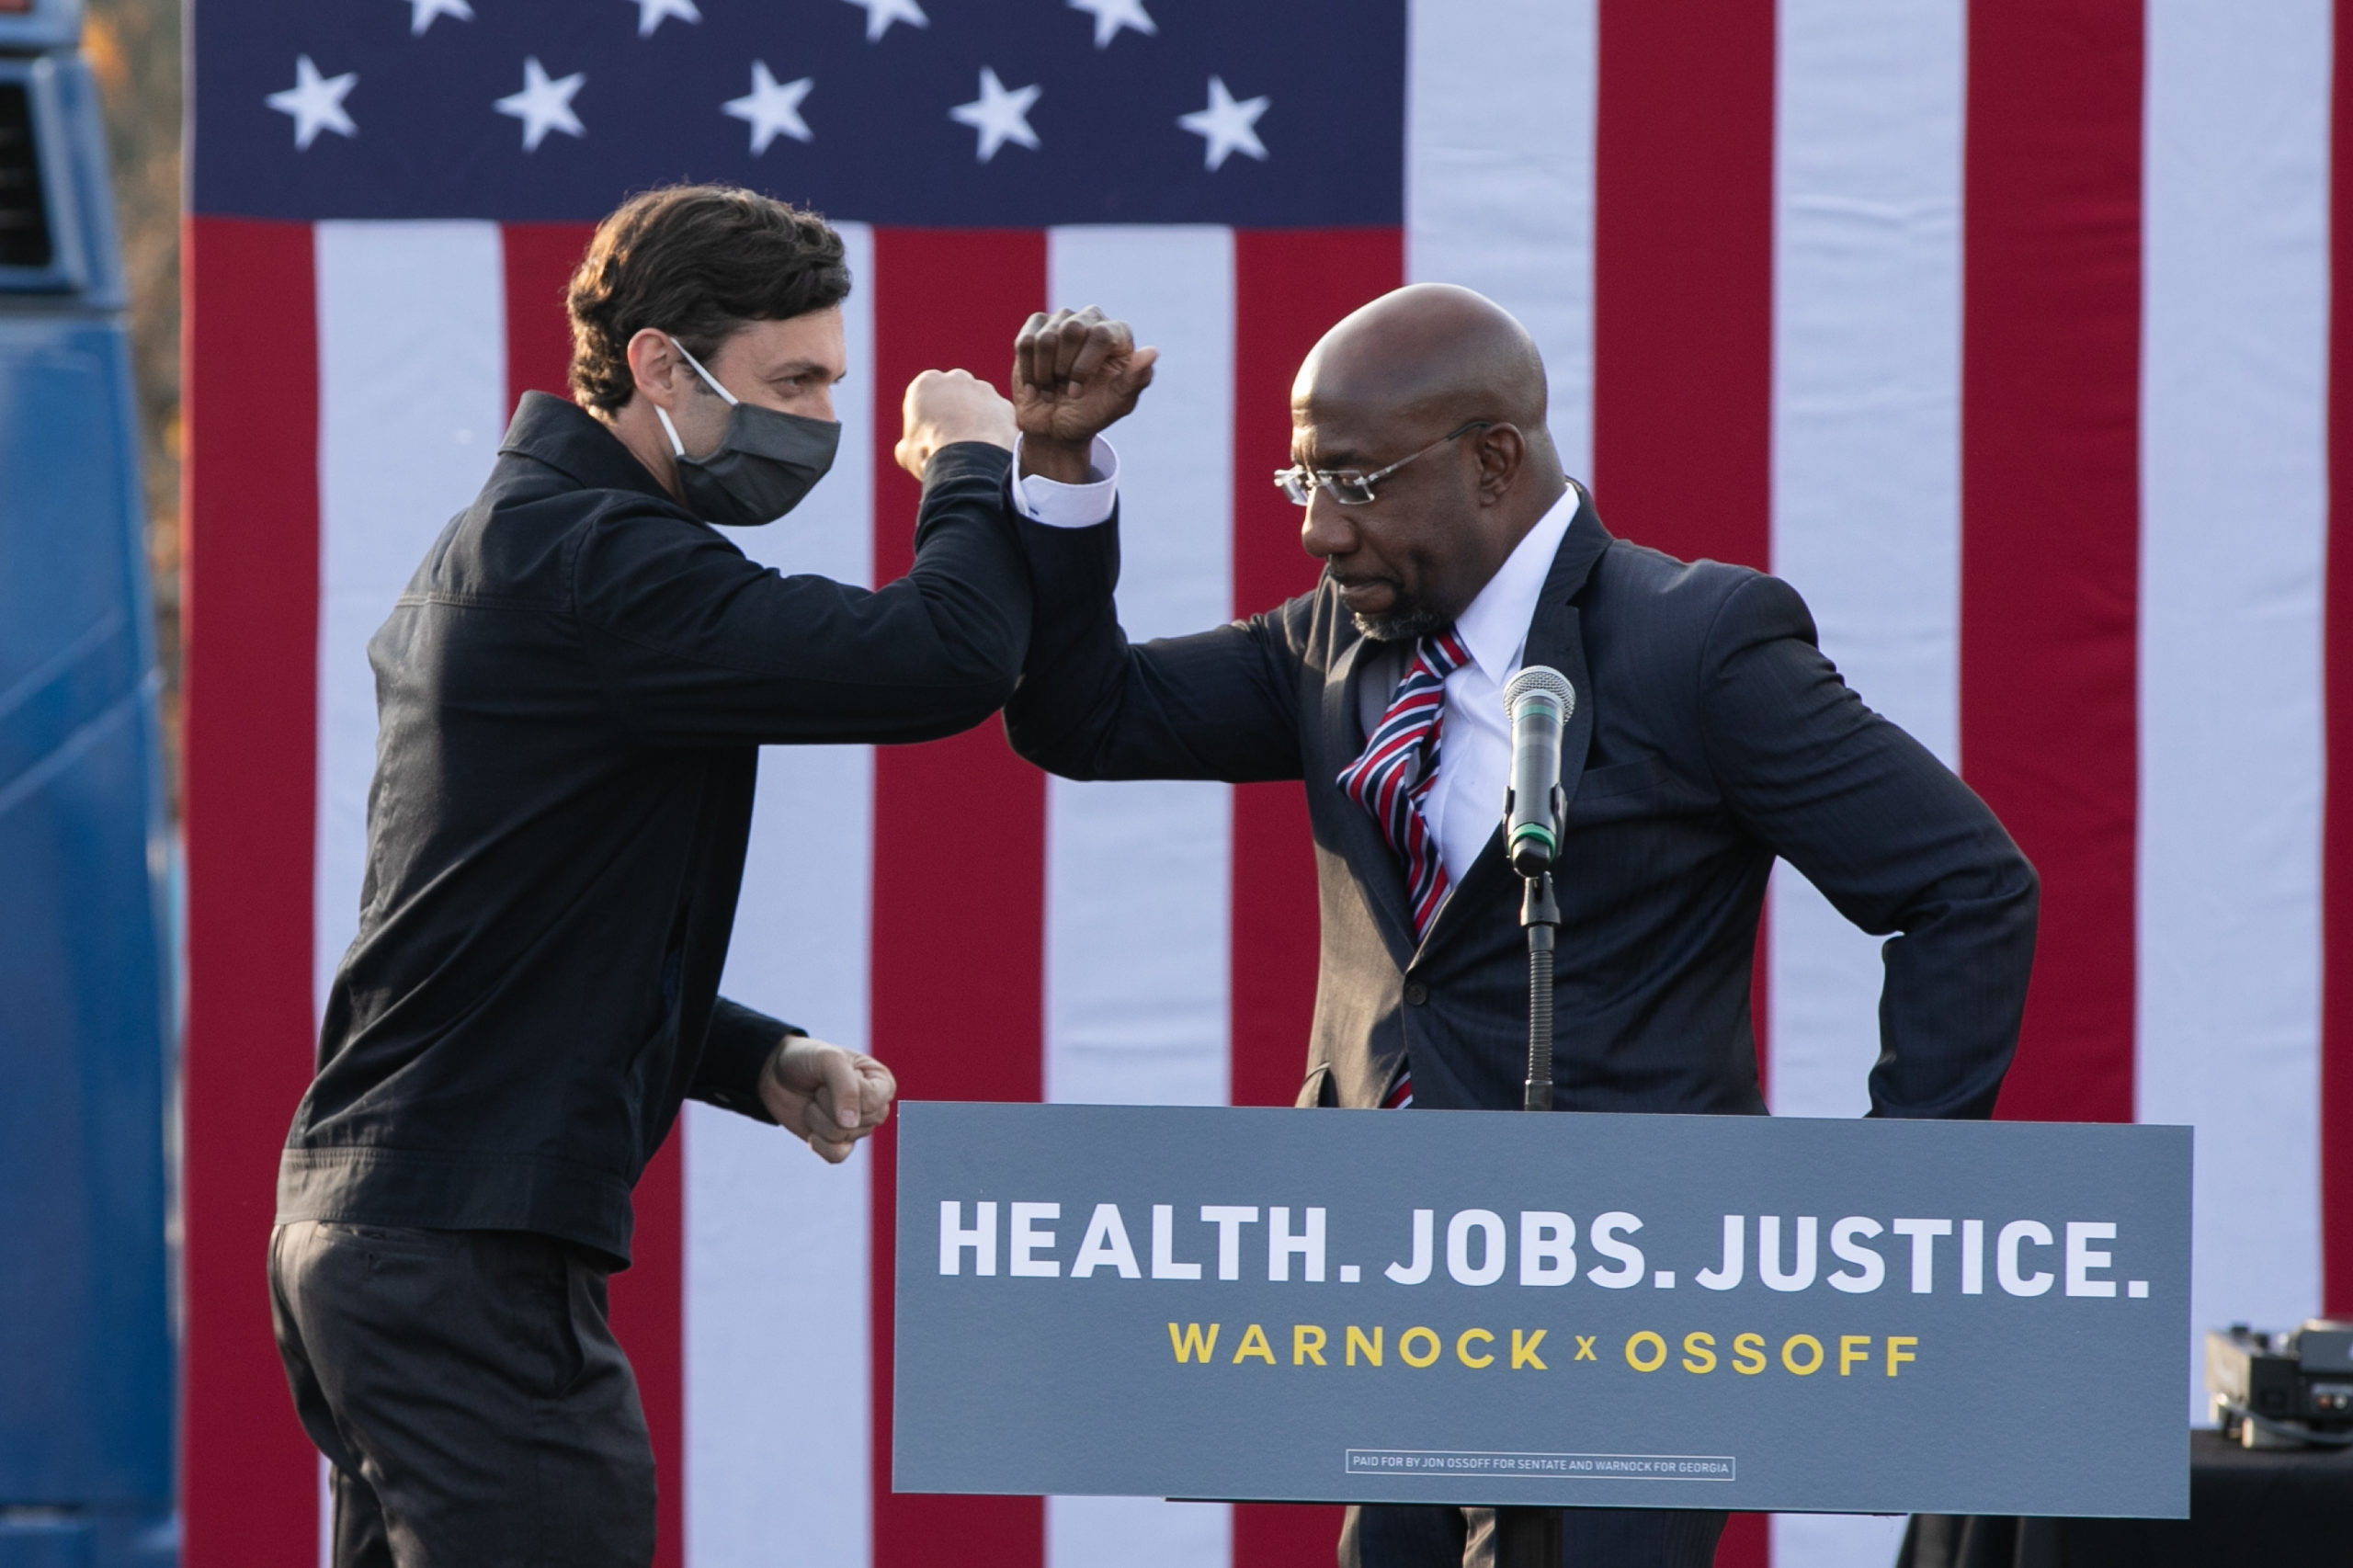 STONECREST, GA - DECEMBER 28: Georgia Democratic Senate candidates Raphael Warnock (R) and Jon Ossoff (L) bump elbows during a "It's Time to Vote" drive-in rally on December 28, 2020 in Stonecrest, Georgia. With a week until the January 5th runoff election that will determine control of the Senate, candidates continue to campaign throughout Georgia. (Photo by Jessica McGowan/Getty Images)